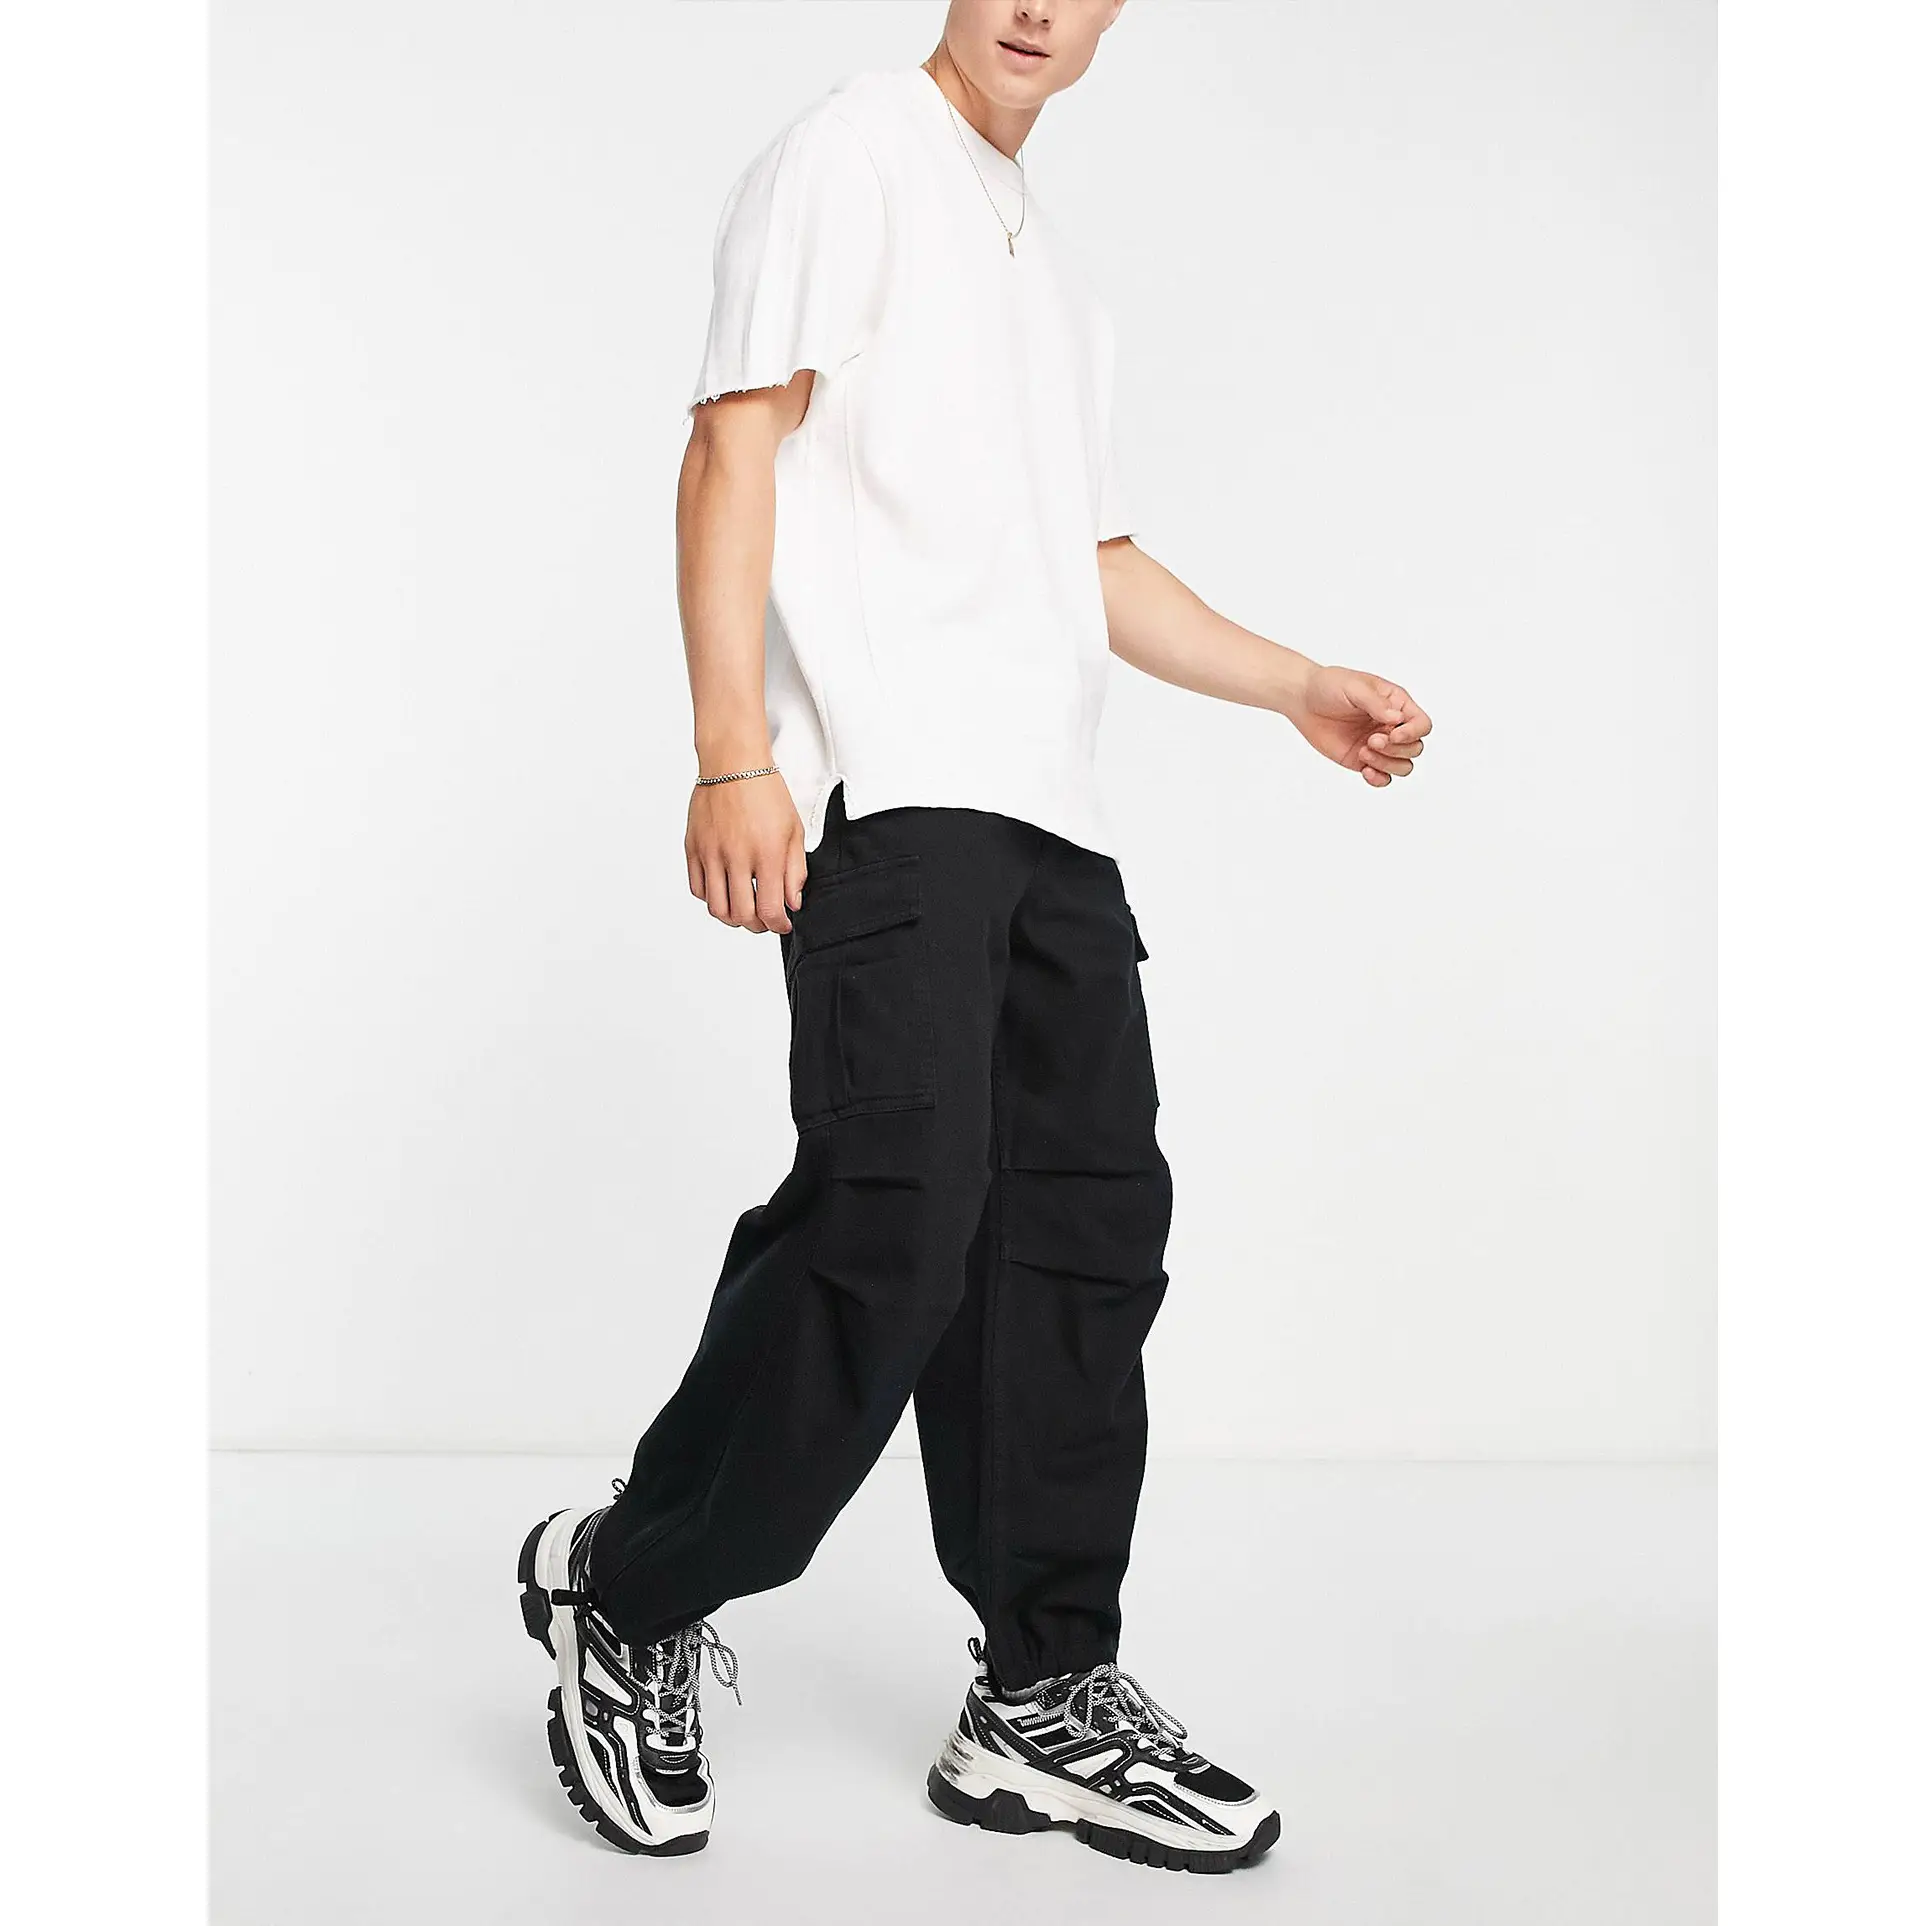 Parachute Pants: What's The Hype About?